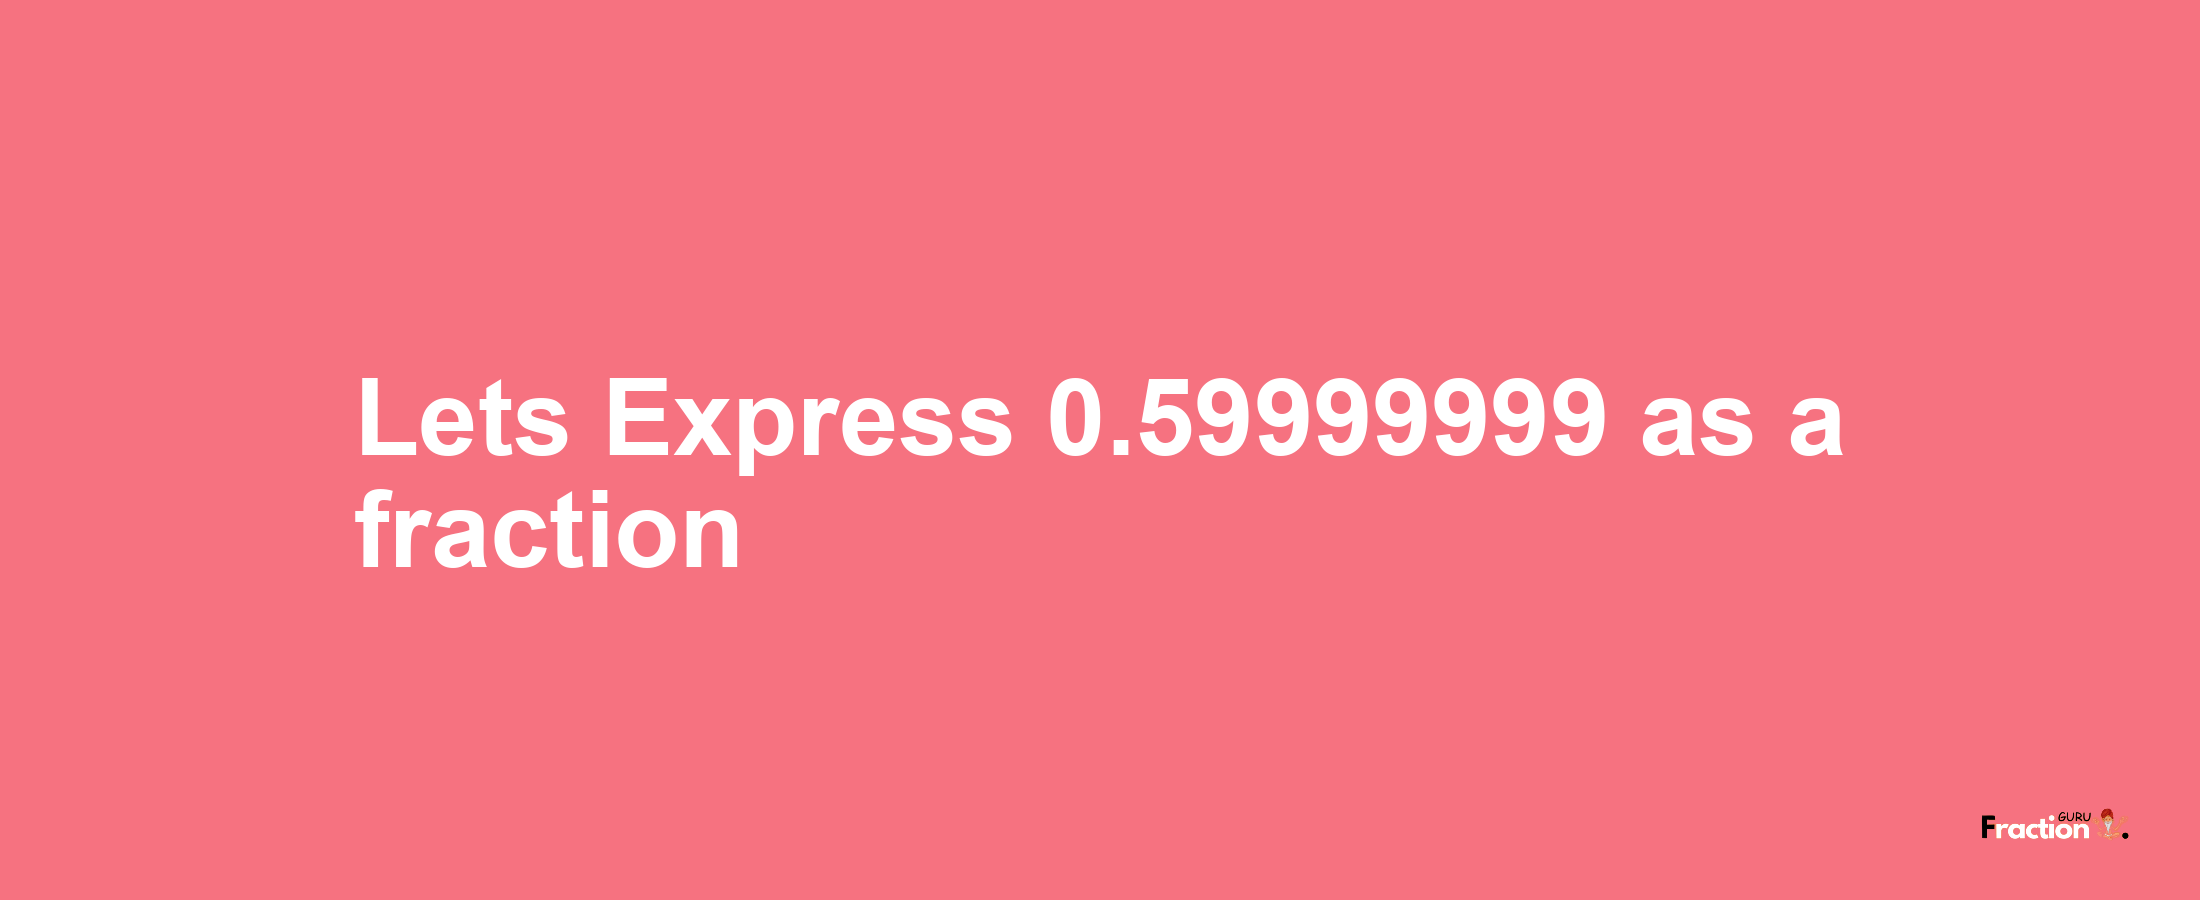 Lets Express 0.59999999 as afraction